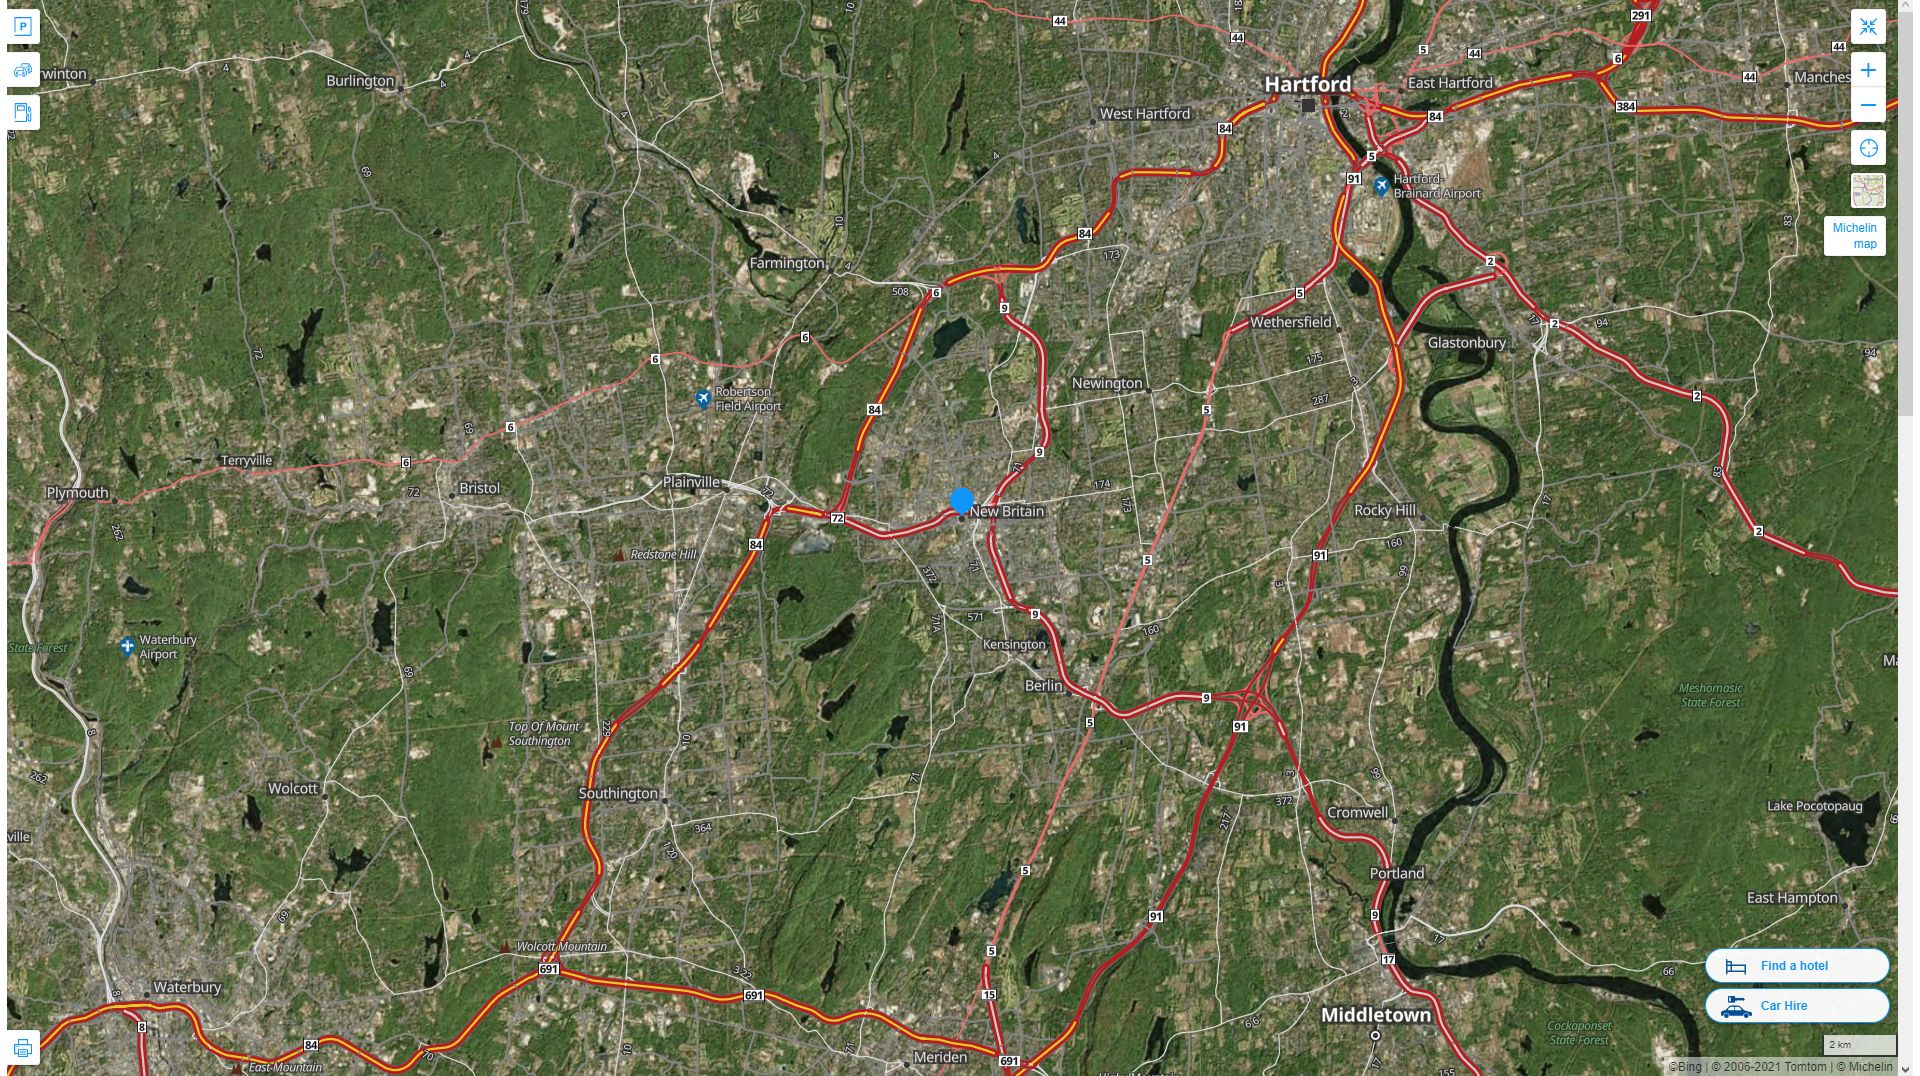 New Britain Connecticut Highway and Road Map with Satellite View